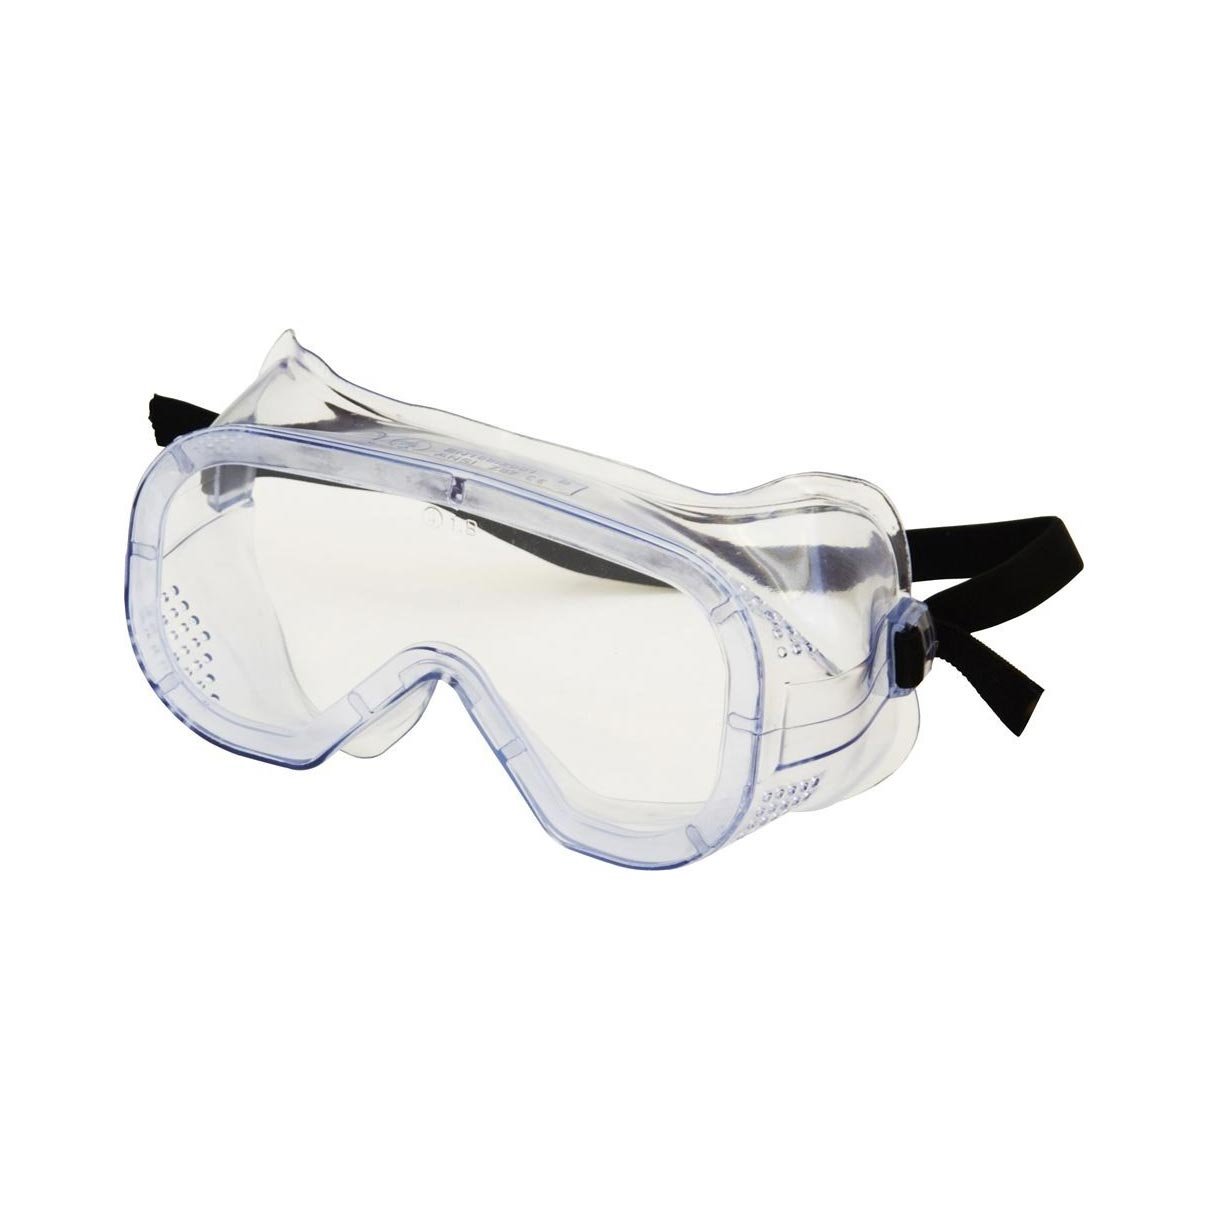 Grinding Goggles – WS23